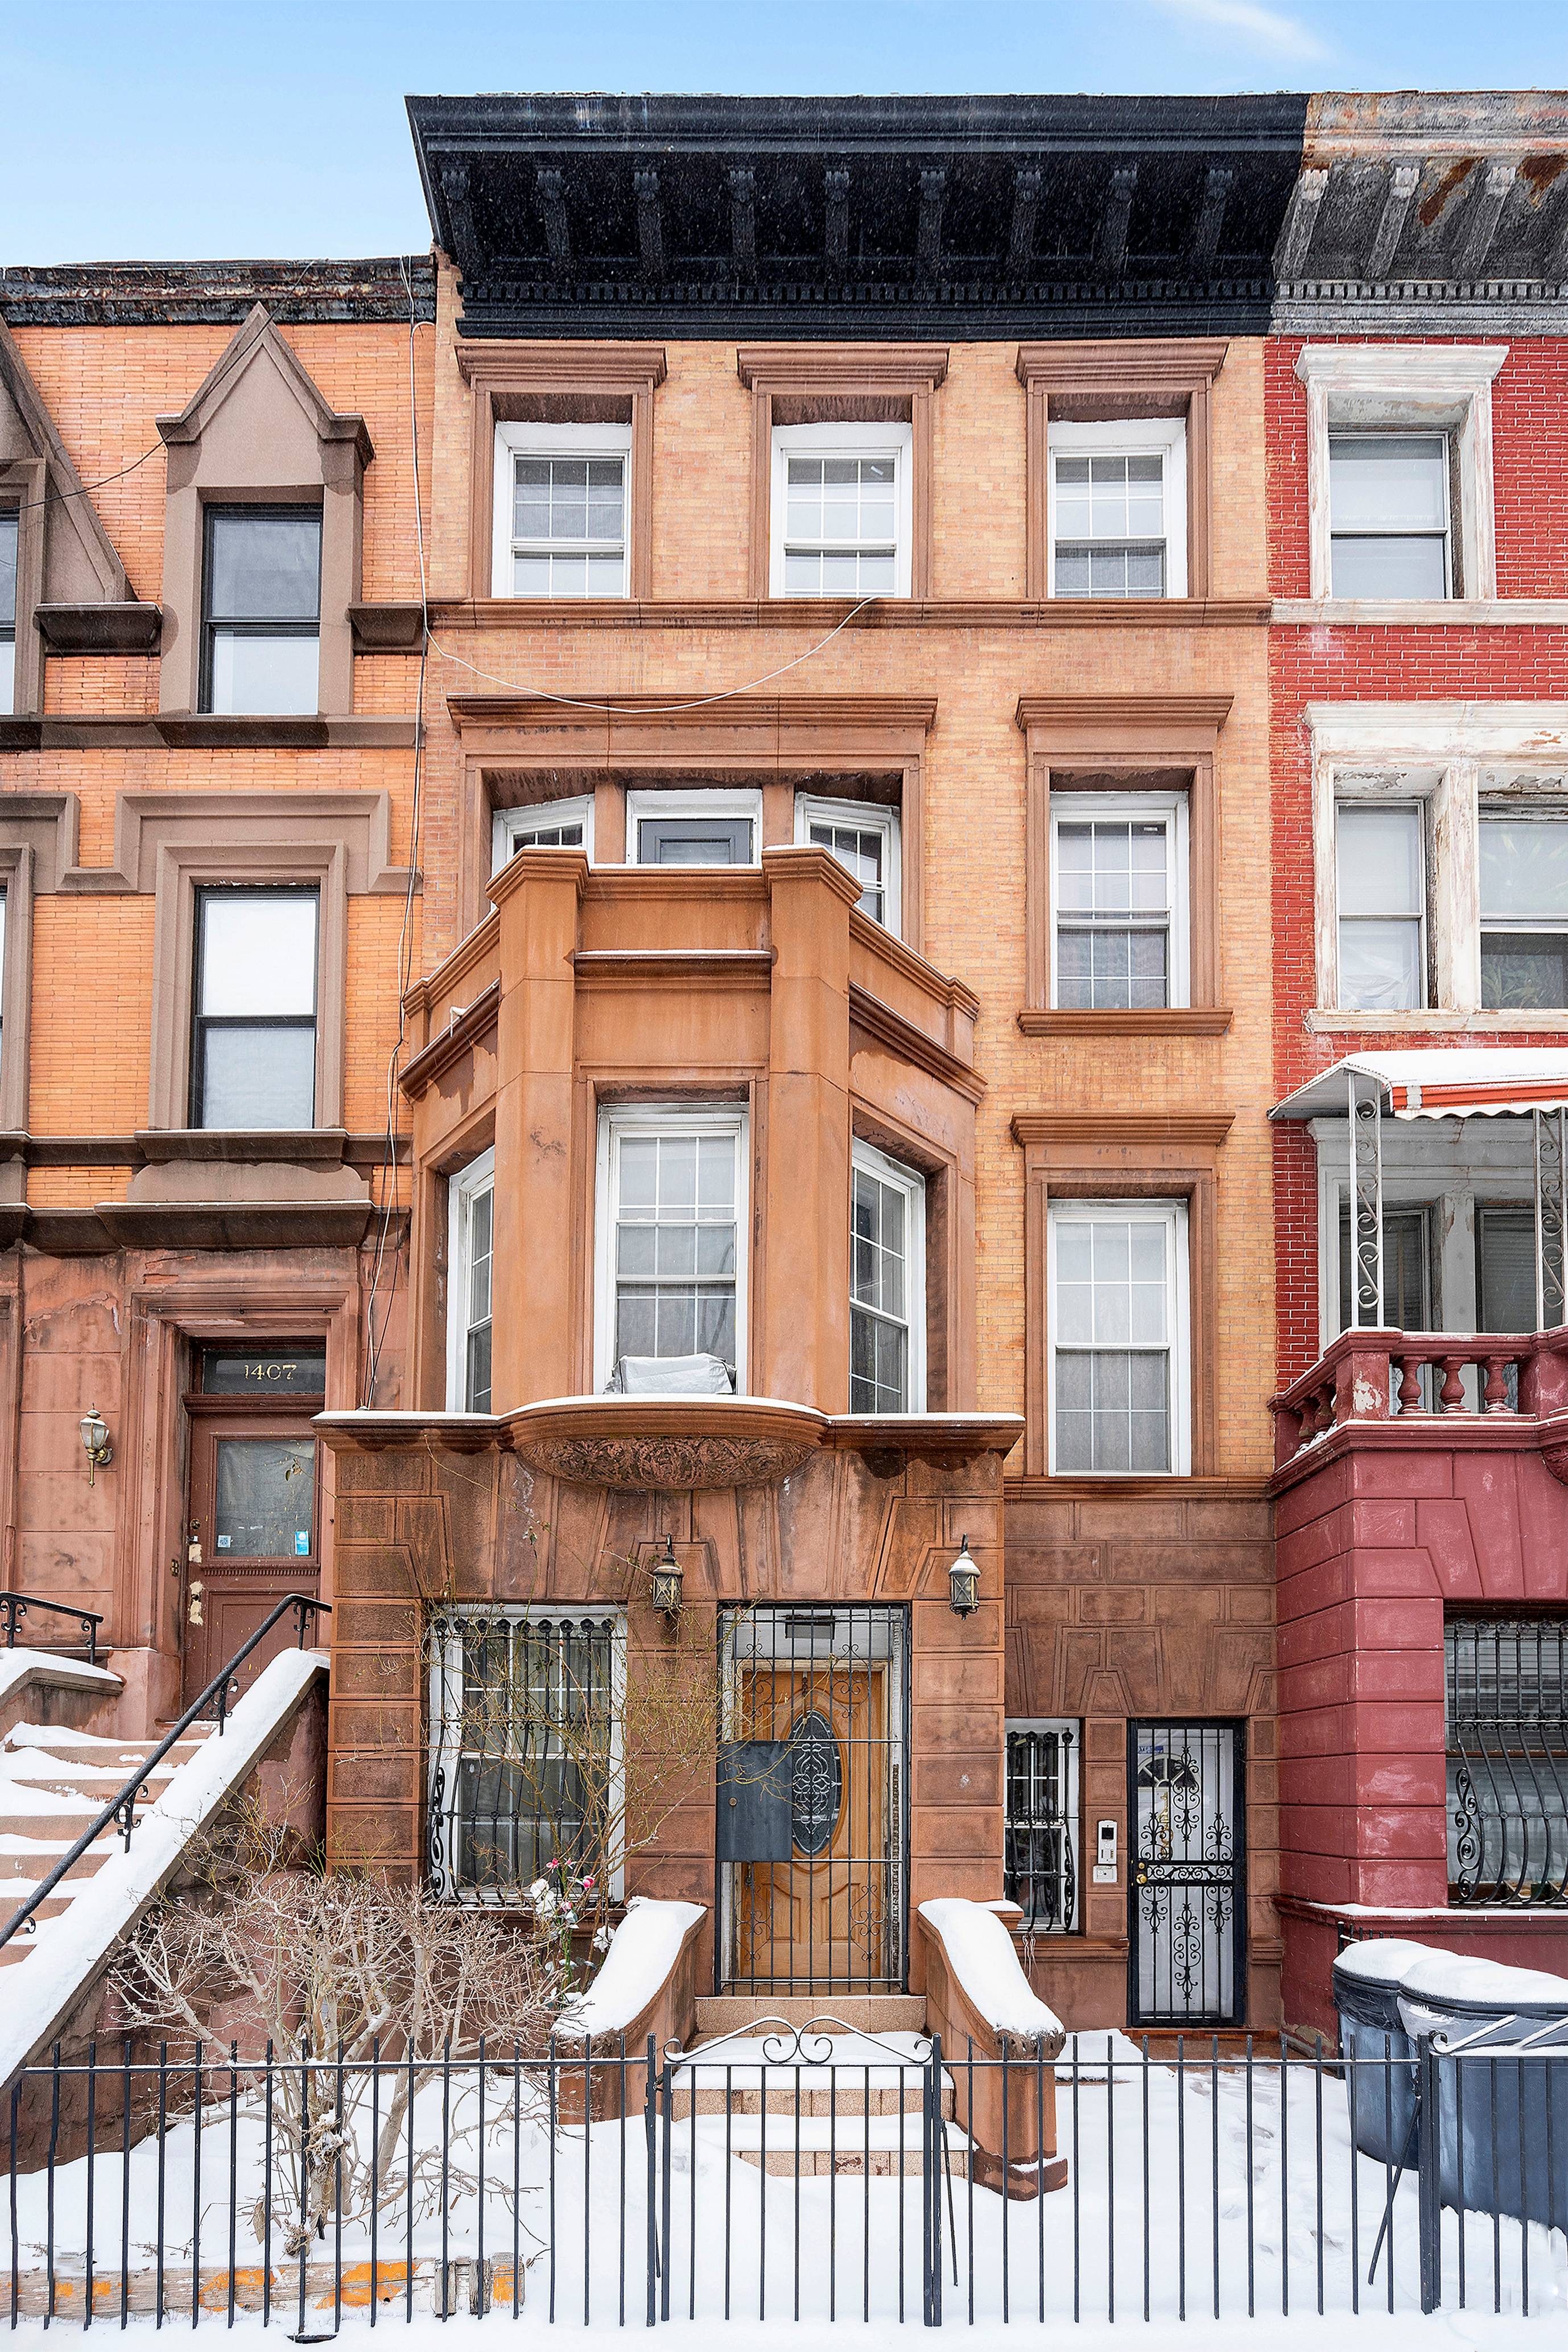 Welcome to 1409 Dean Street, a towering 4 story townhome boasting a rich brownstone and masonry brick facade, and a 3900 square foot interior space, characterized by king sized bedrooms, ...